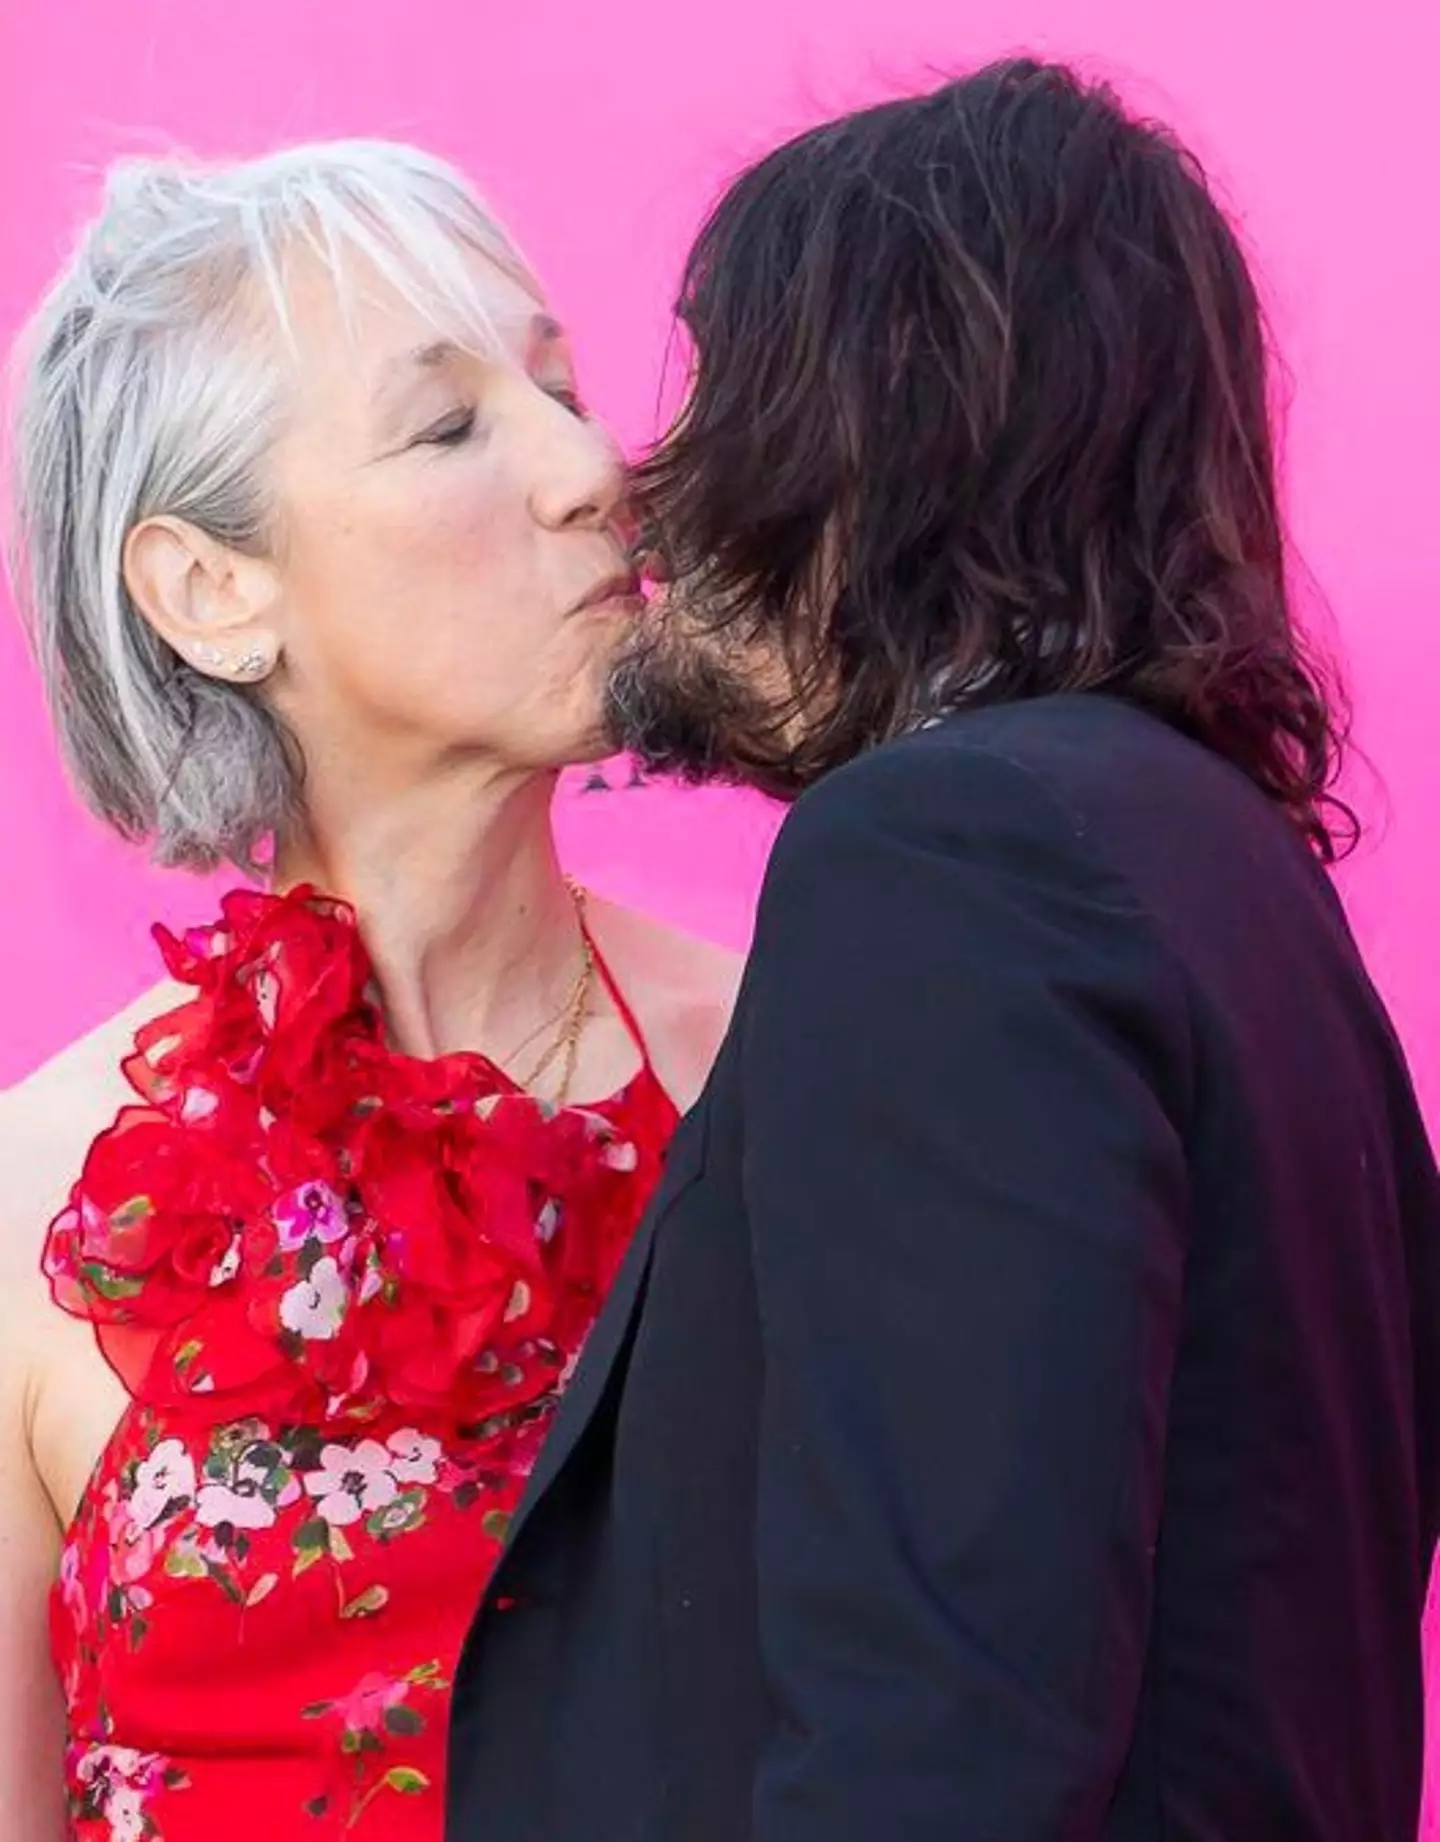 Keanu Reeves was photographed kissing his girlfriend on the red carpet.